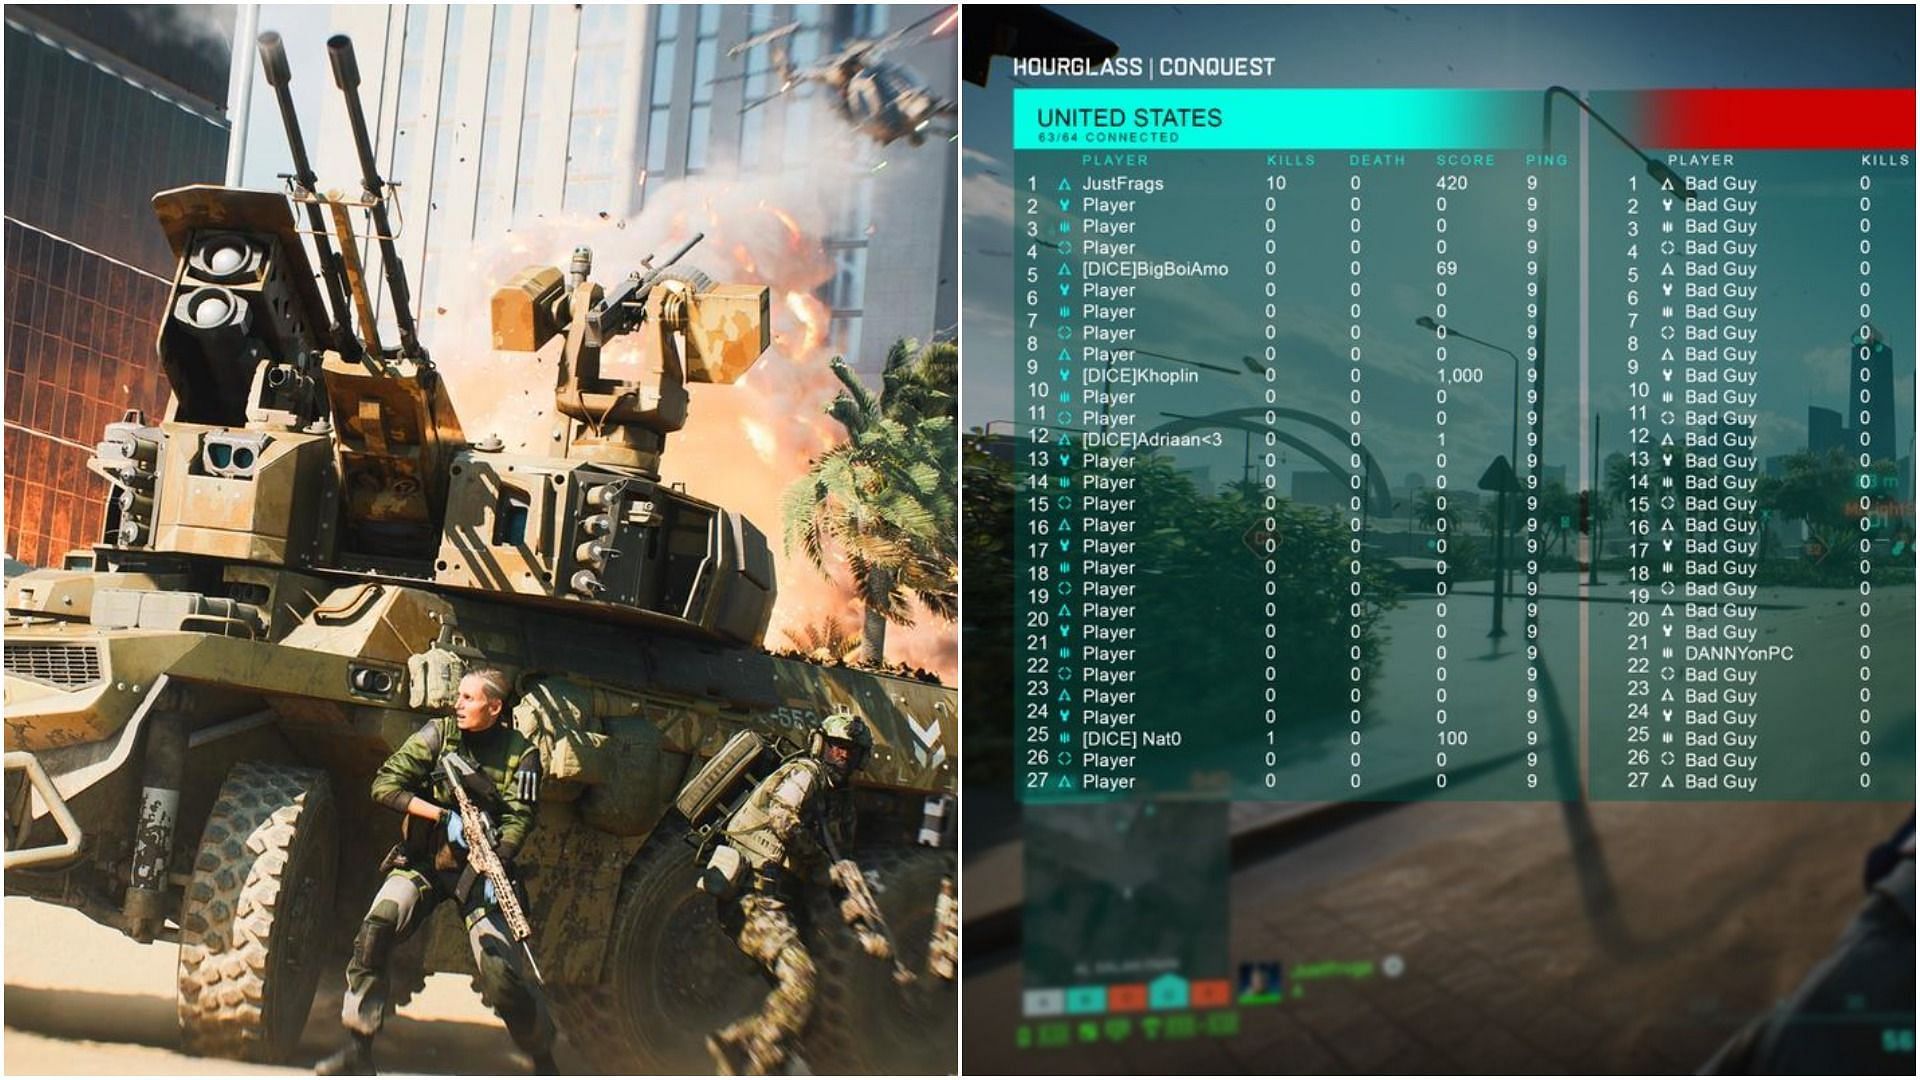 Battlefield 2042 is getting a functional scoreboard, but players are confused (images via DICE, Jackfrags)